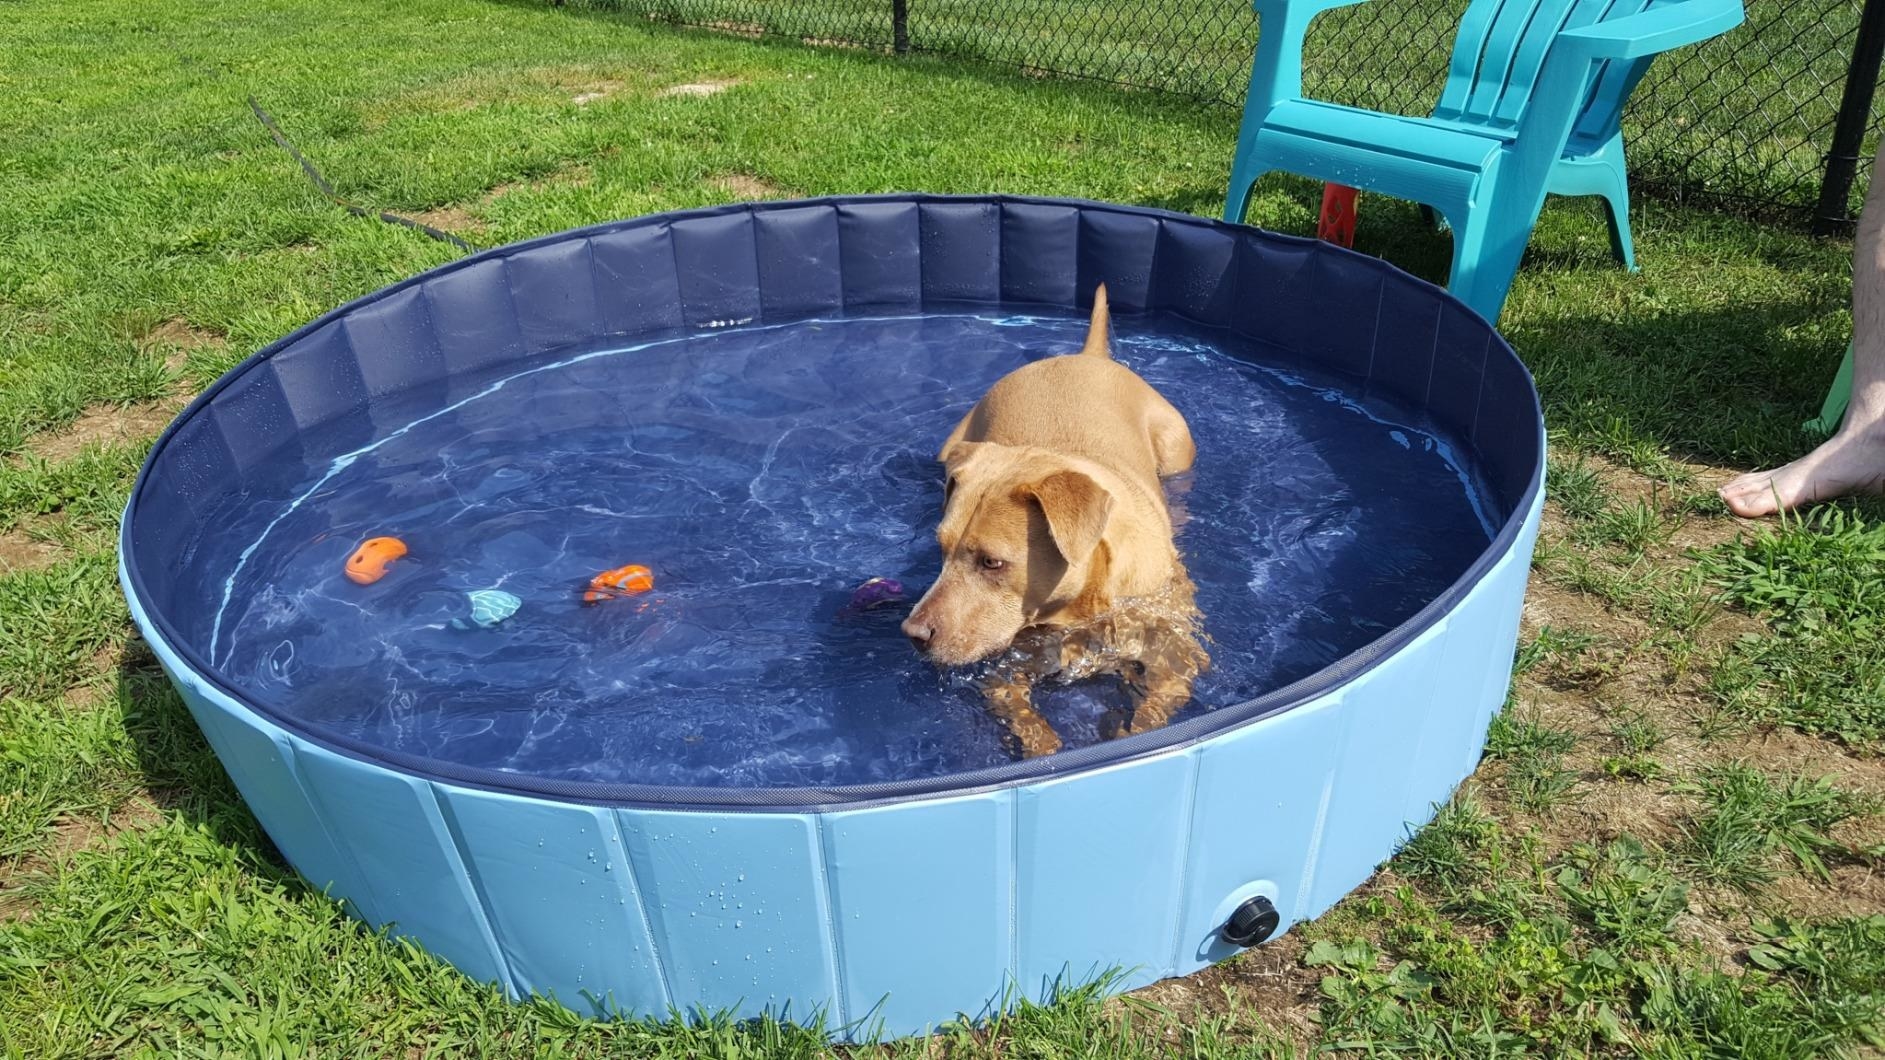 Reviewer's large dog relaxing in the pool with plenty of room leftover